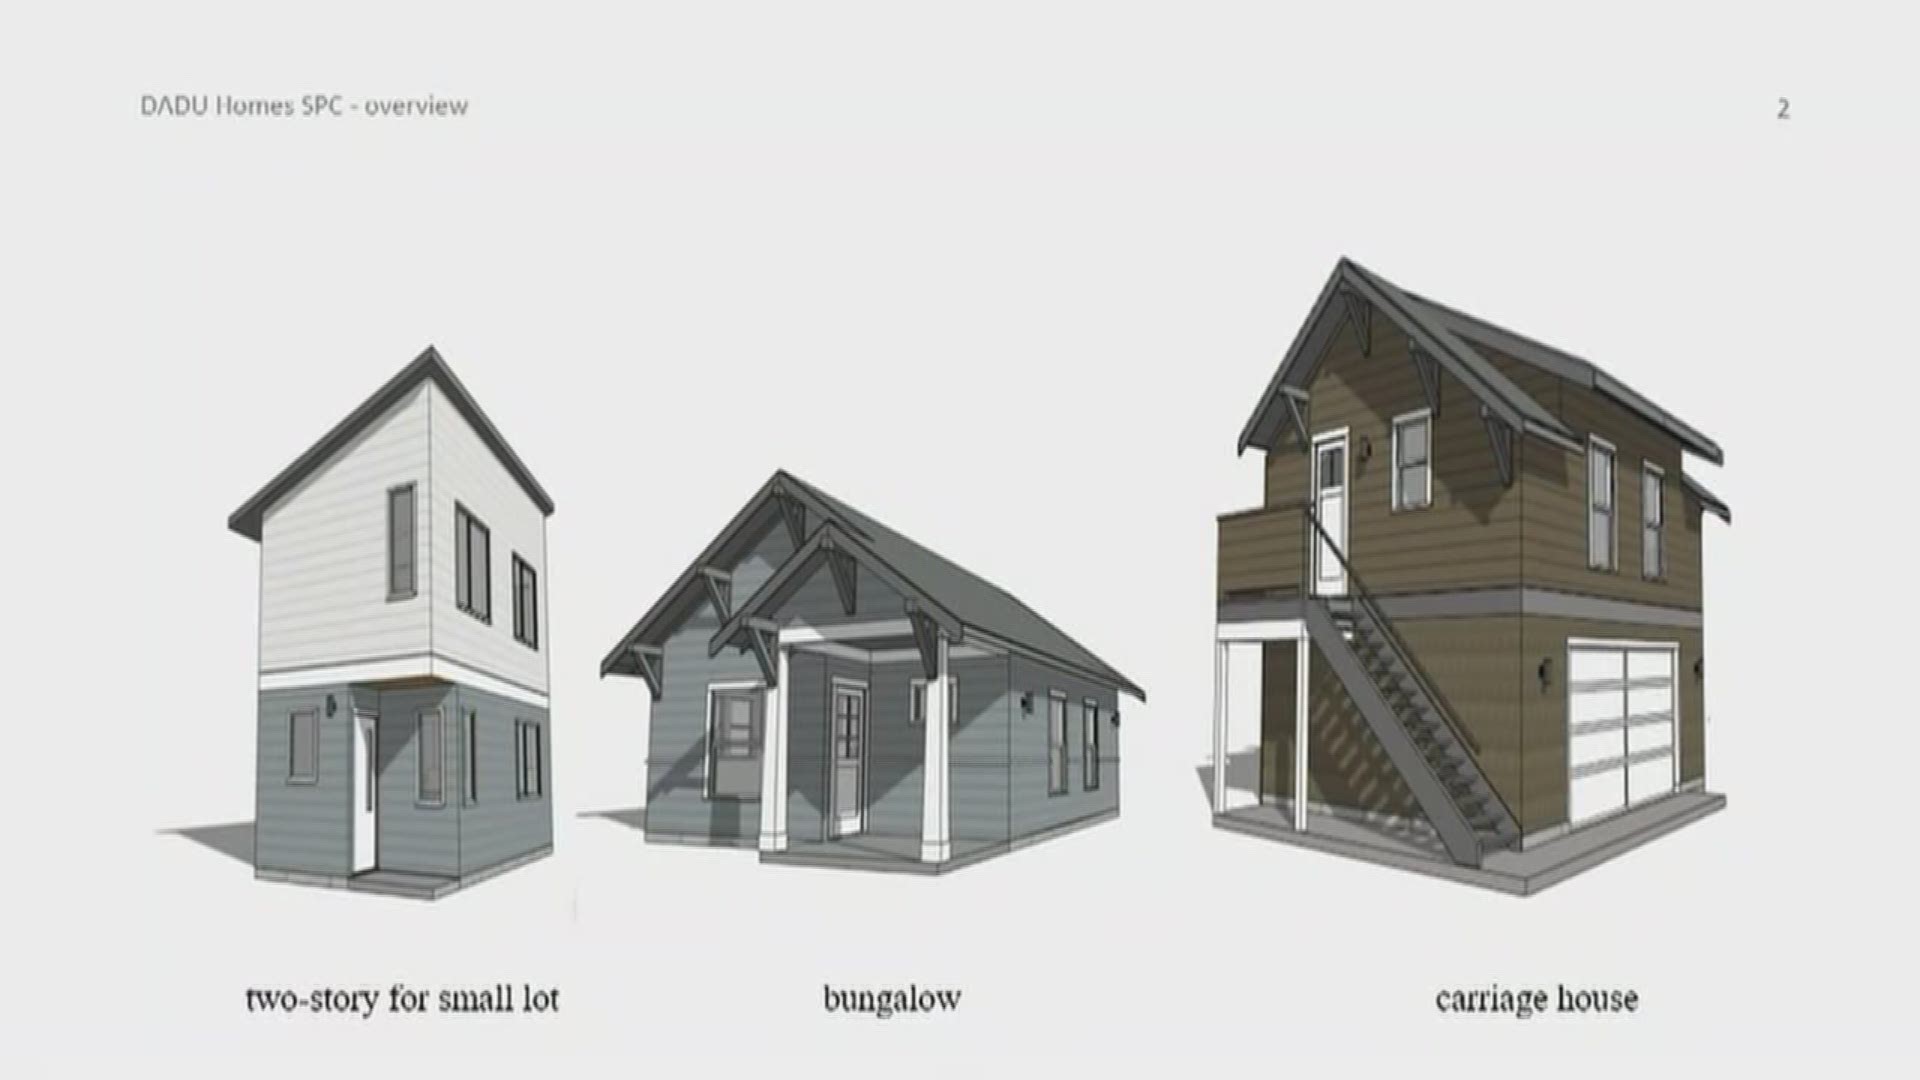 The City of Tacoma is working on new rules that could allow people to build living spaces of up to 1,000 square feet on their property. KING 5's Jenna Hanchard breaks down what this means for the residents.